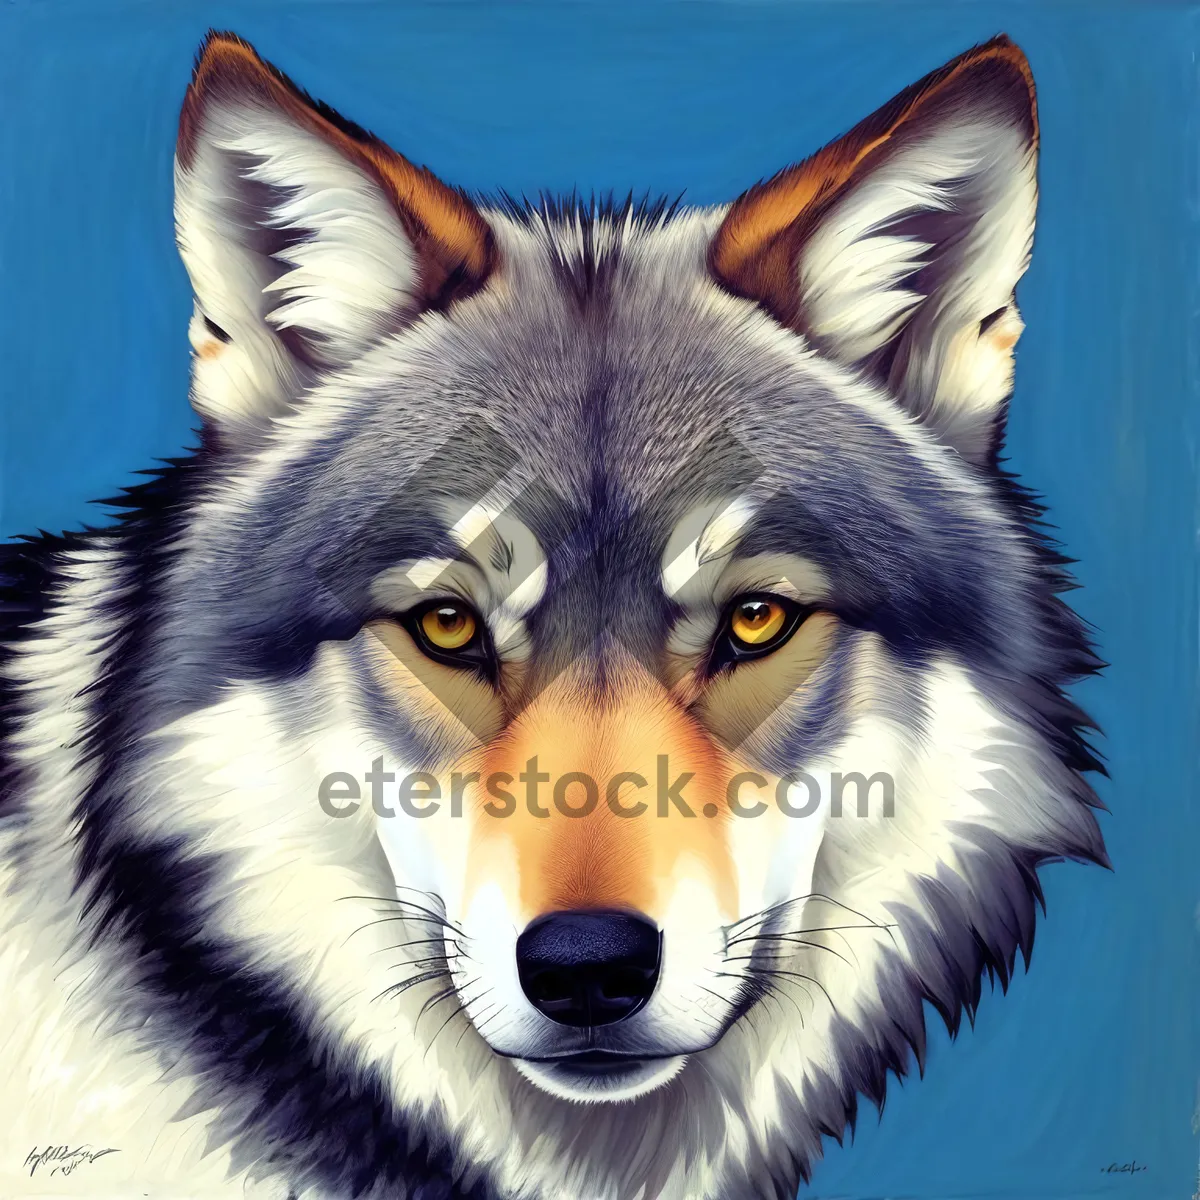 Picture of Wild Canine with Piercing Eyes: Majestic Timber Wolf